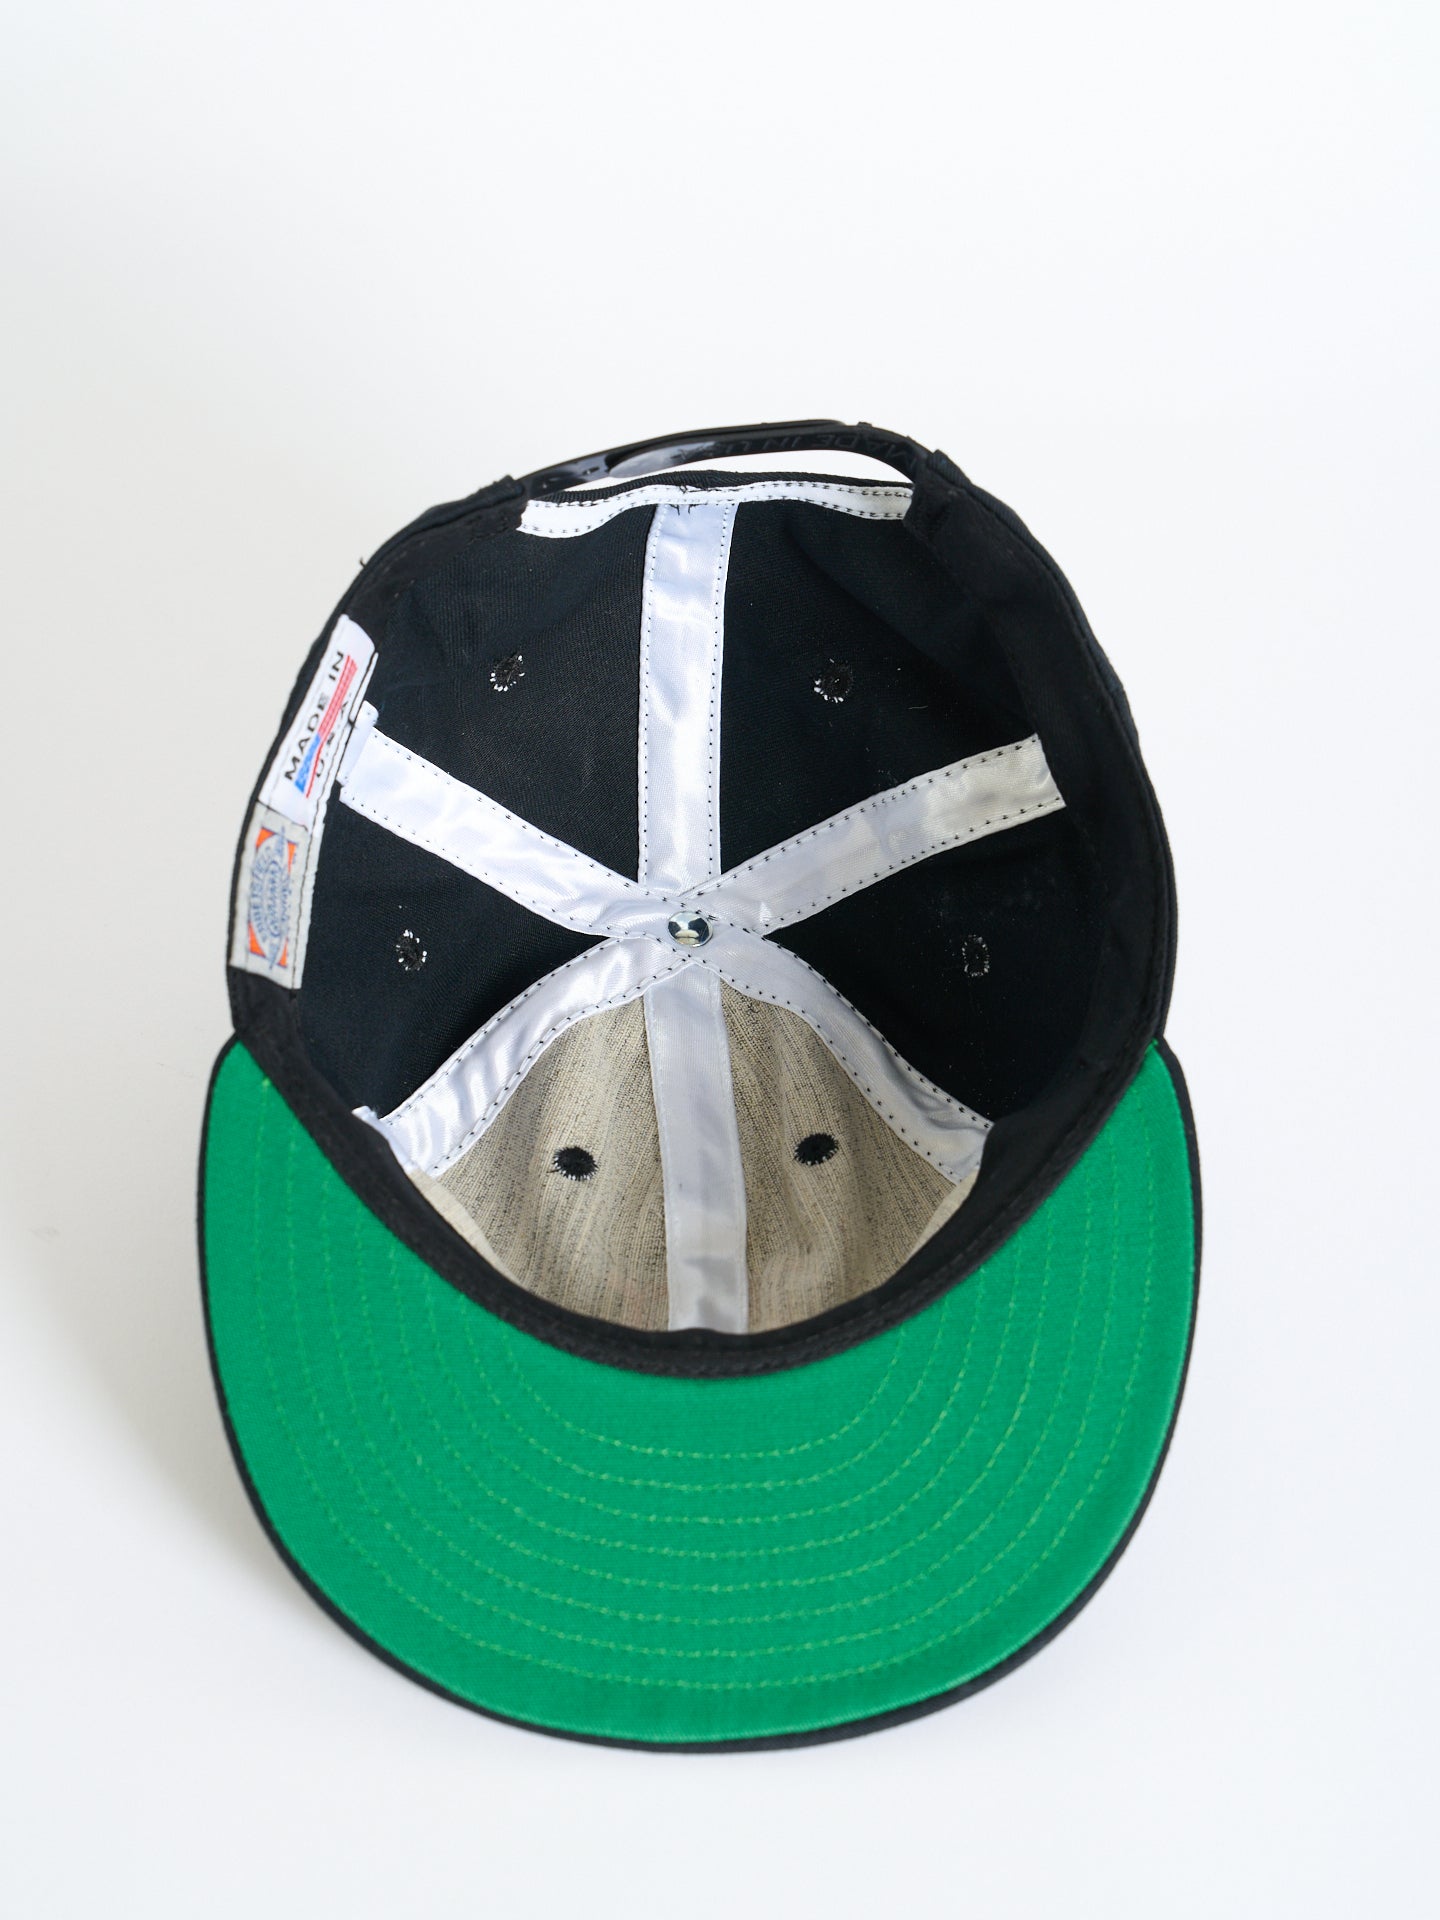 NNY x Ebbets Field Flannels - Queens Snapback - Black - Cotton